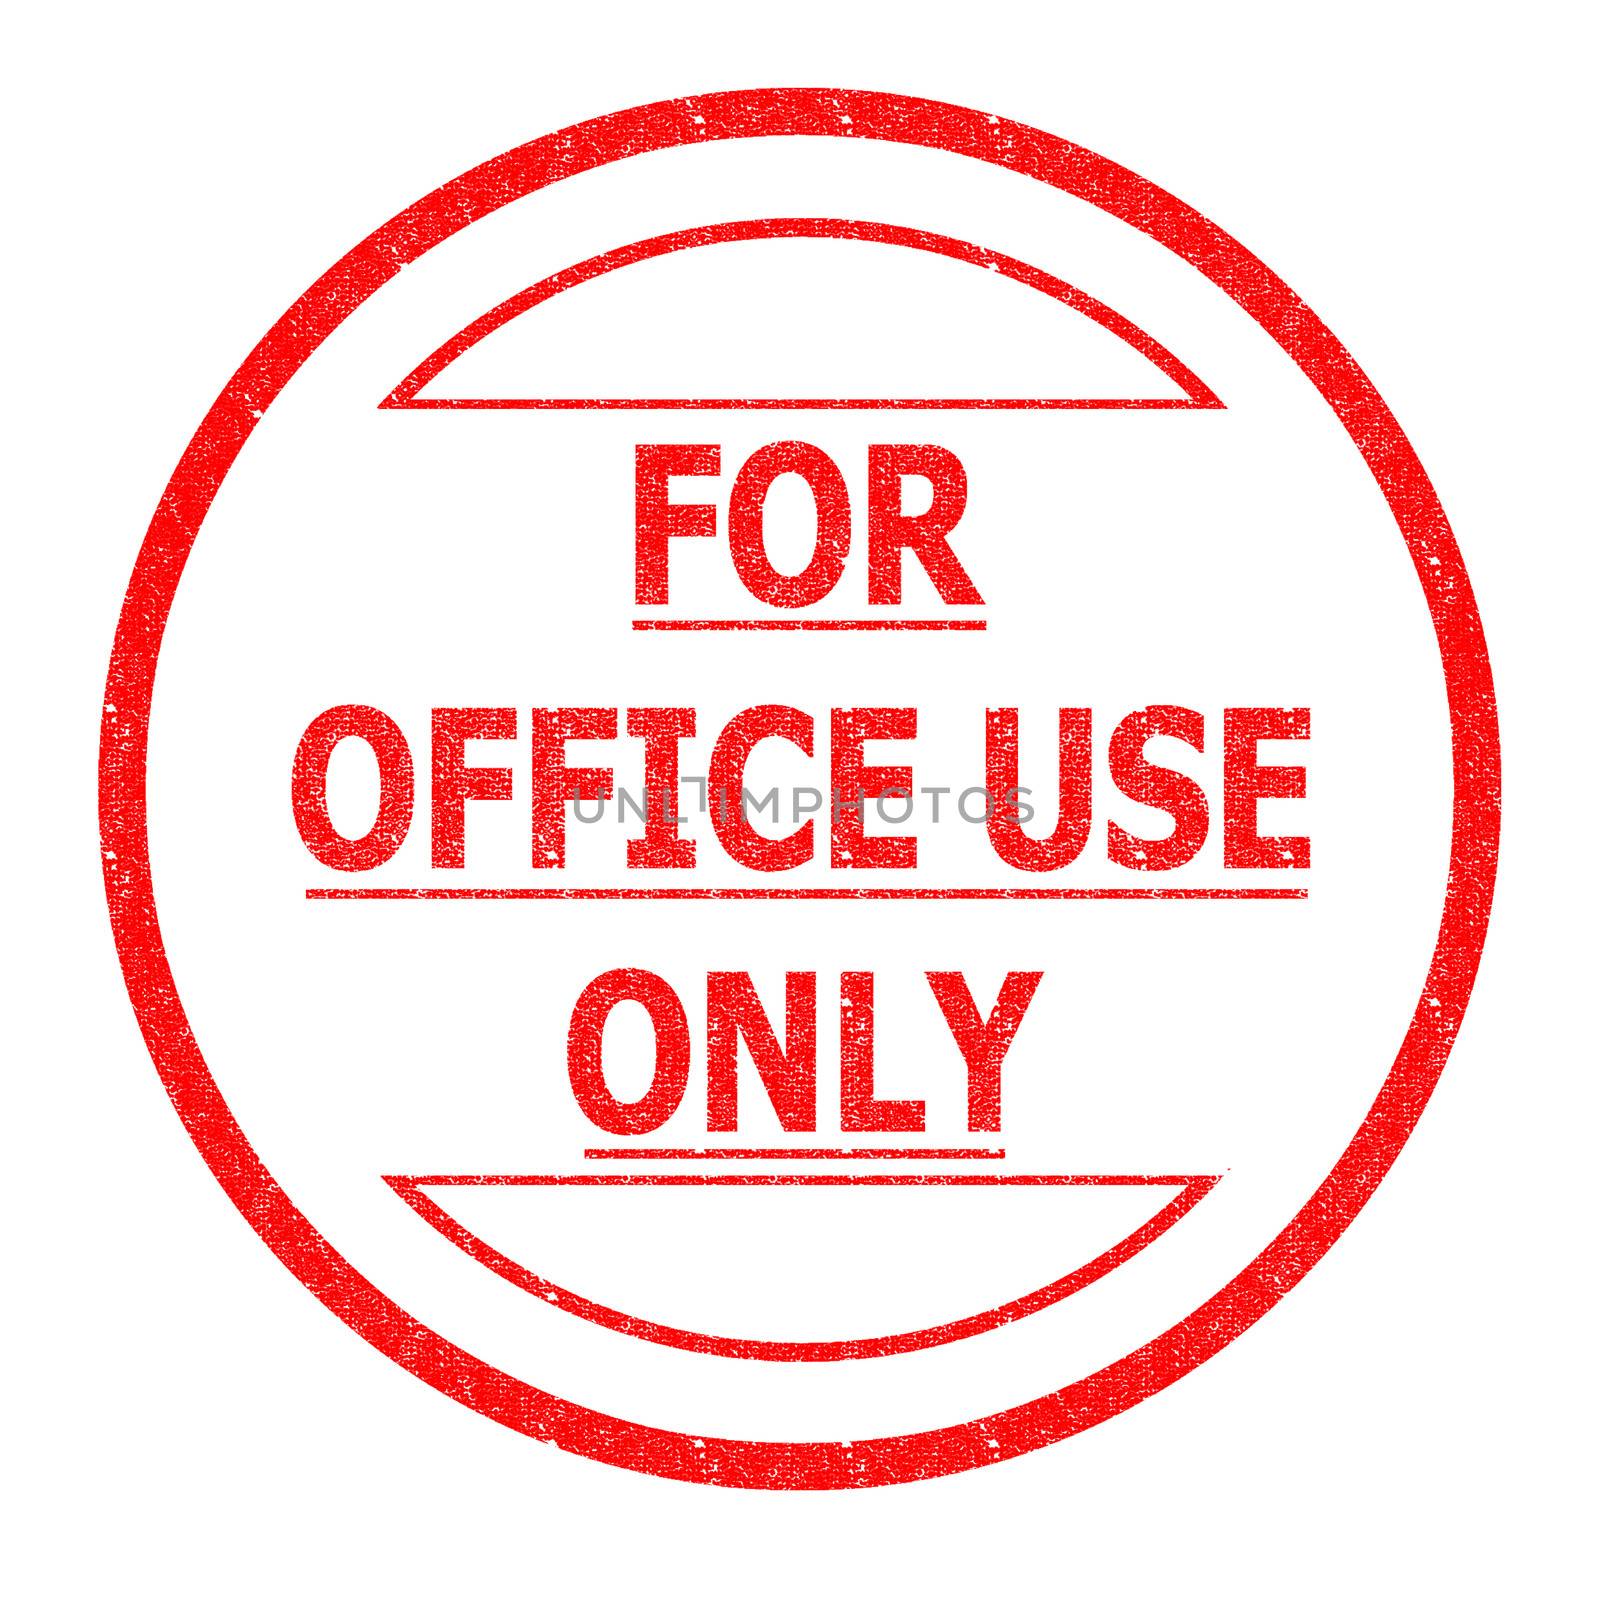 FOR OFFICE USE ONLY Rubber Stamp over a white background.